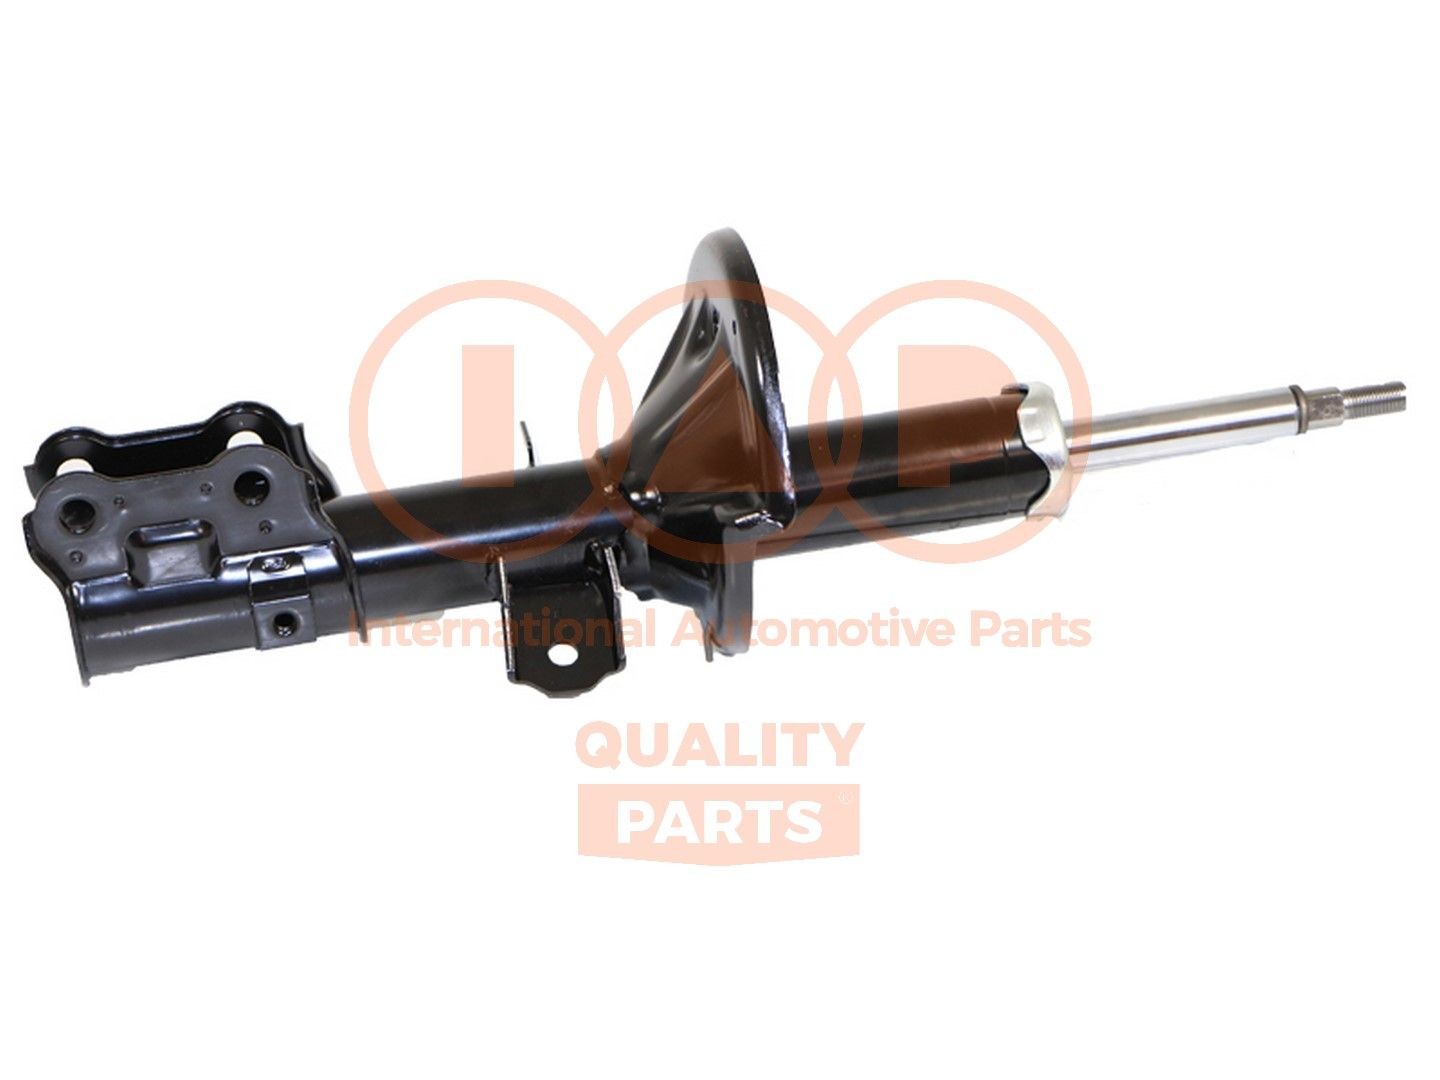 IAP QUALITY PARTS 504-07144 Shock absorber 546601C600